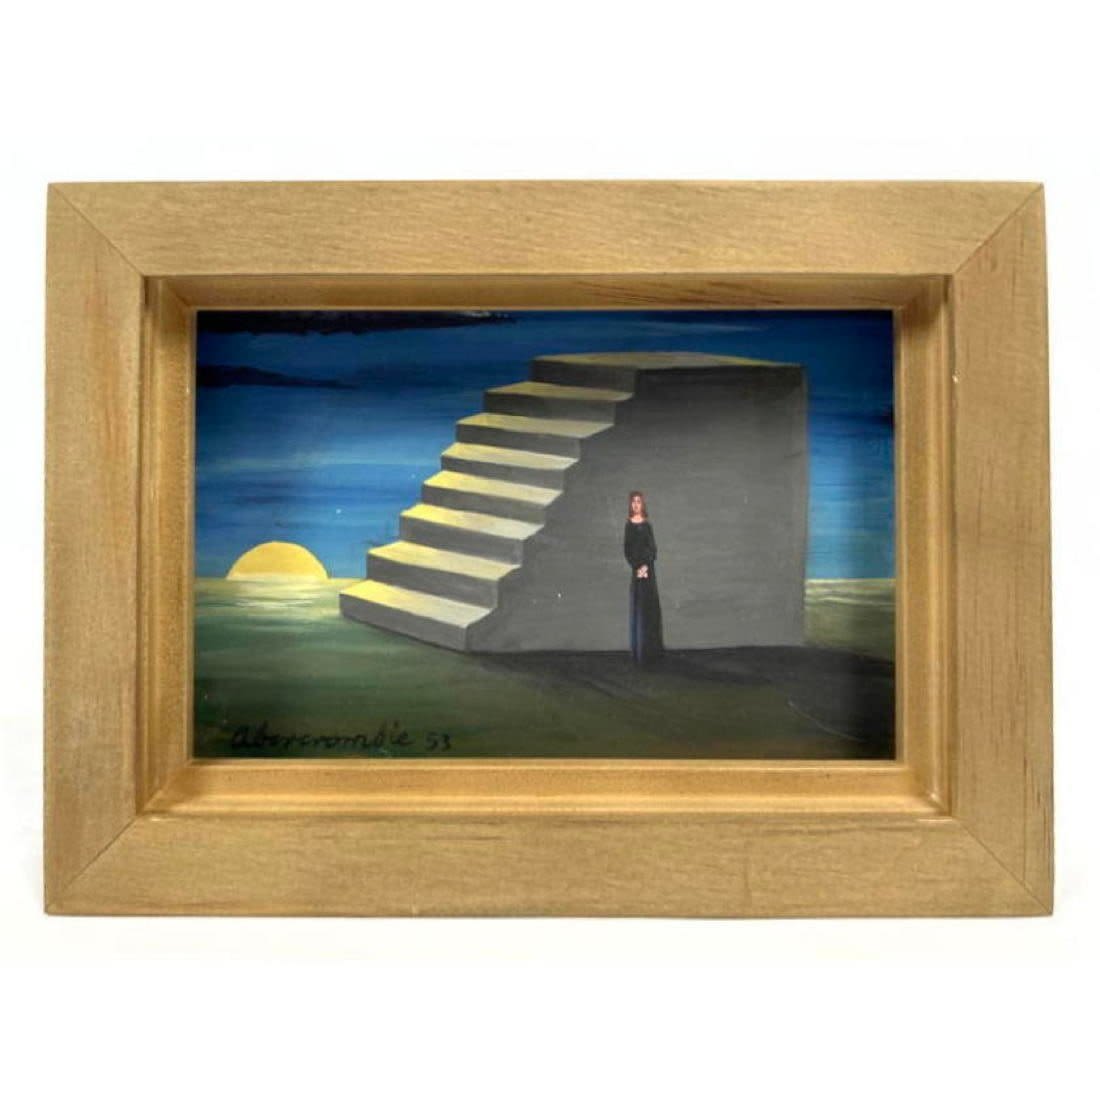 Attributed to Gertrude Abercrombie 362cb5